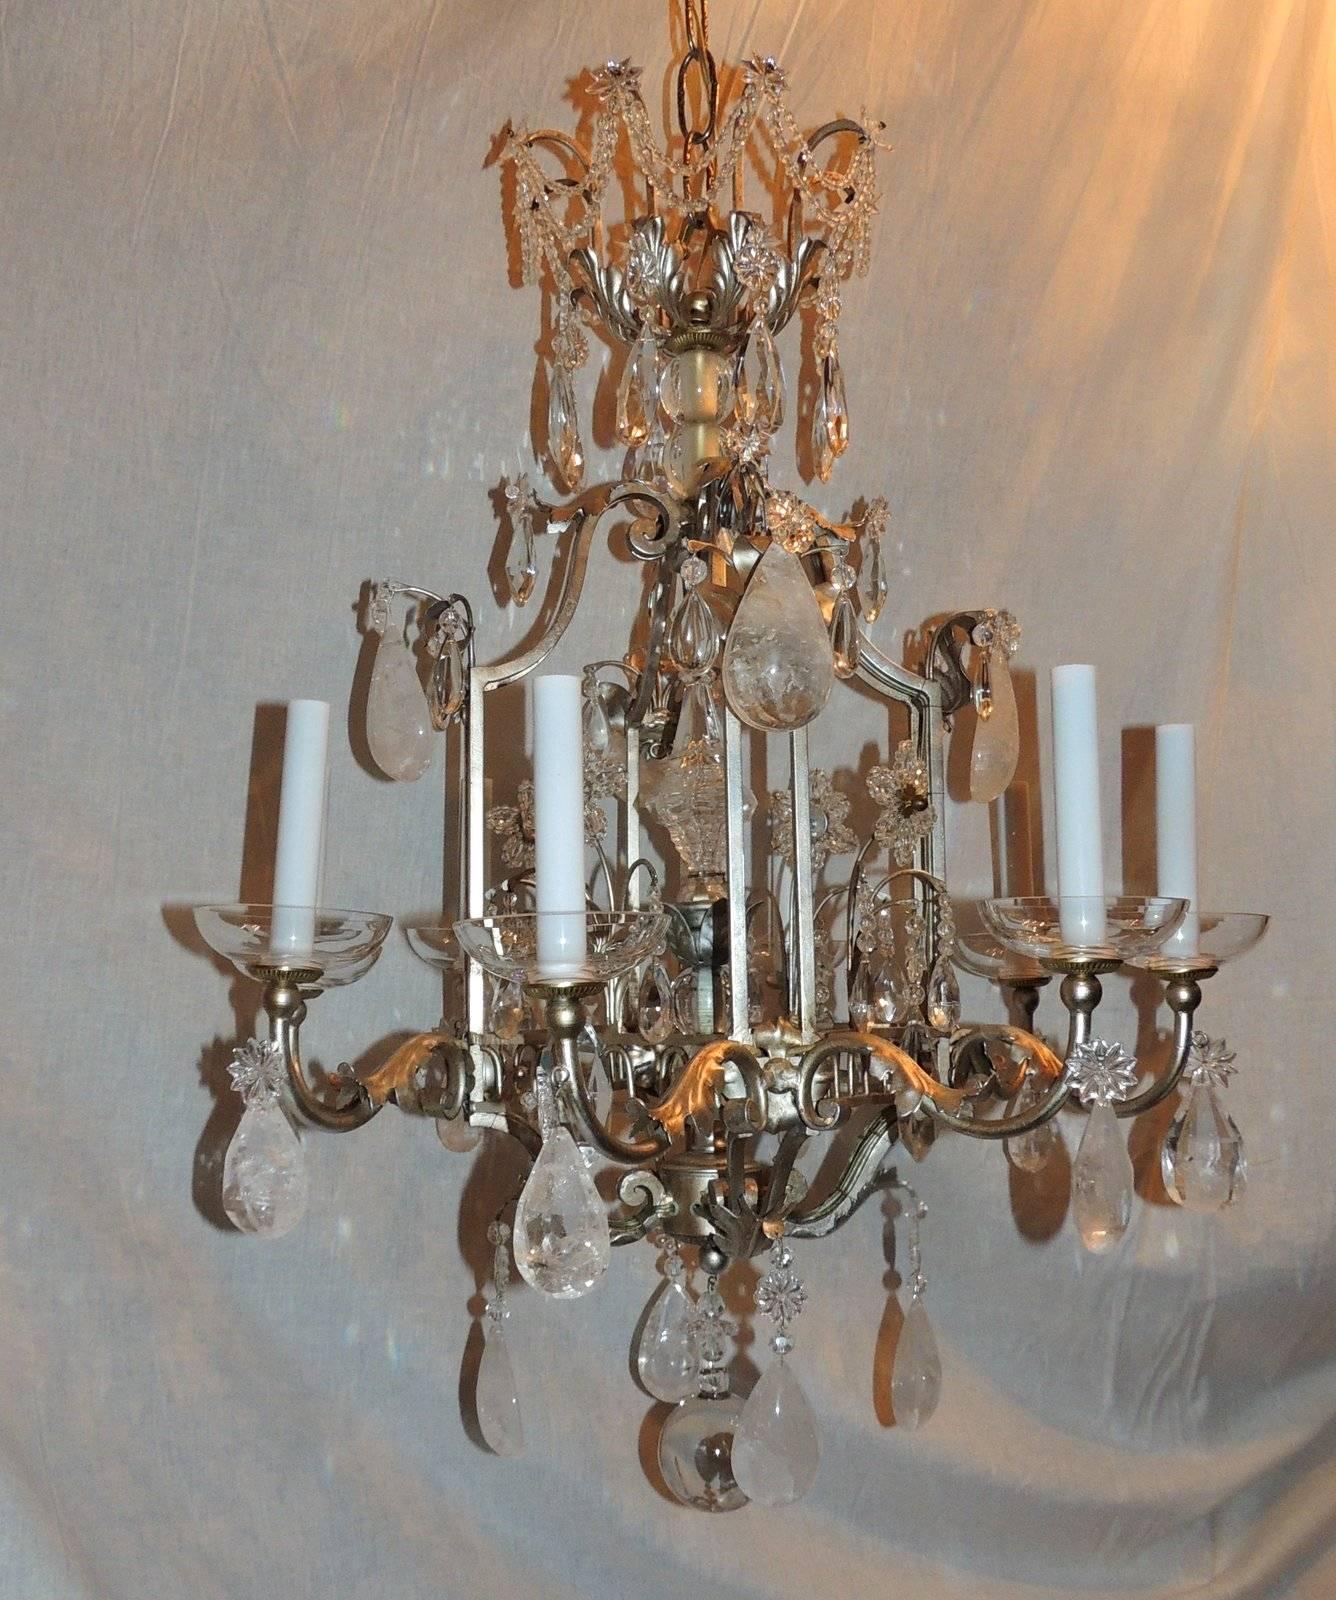 This is a fabulous and unusual pagoda form chandelier that has a beautiful crown with draped crystals and beading. Each of the eight scrolled arms have a crystal flower from which hangs a rock crystal. The chandelier is finished with a rock crystal